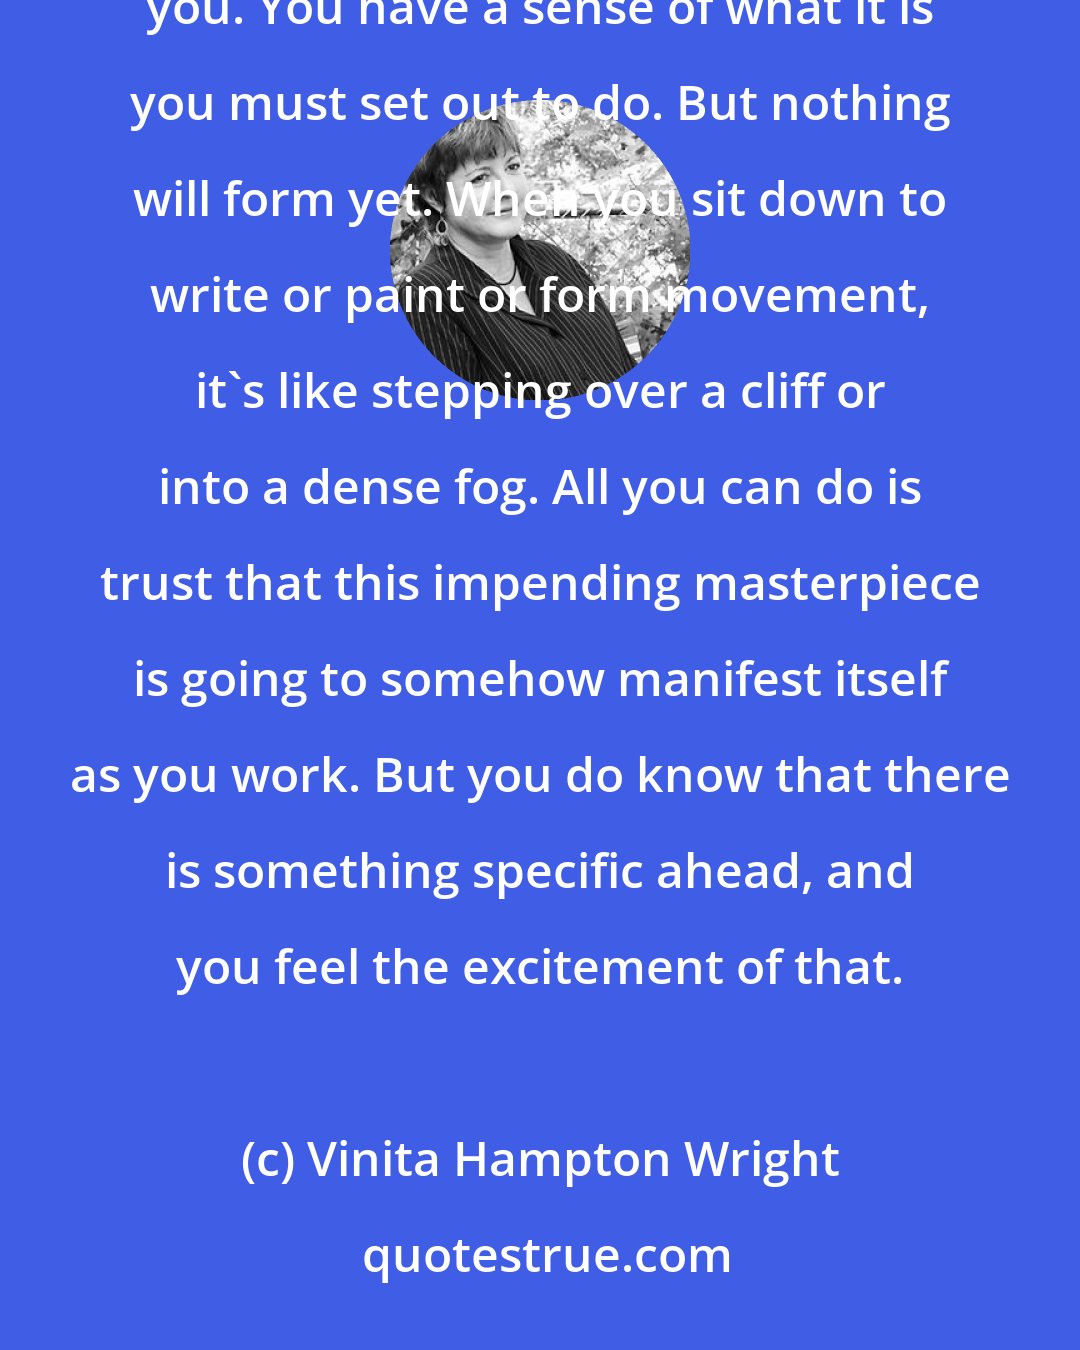 Vinita Hampton Wright: For some people, the beginning is a time of complete chaos. You see bits and pieces of what is before you. You have a sense of what it is you must set out to do. But nothing will form yet. When you sit down to write or paint or form movement, it's like stepping over a cliff or into a dense fog. All you can do is trust that this impending masterpiece is going to somehow manifest itself as you work. But you do know that there is something specific ahead, and you feel the excitement of that.